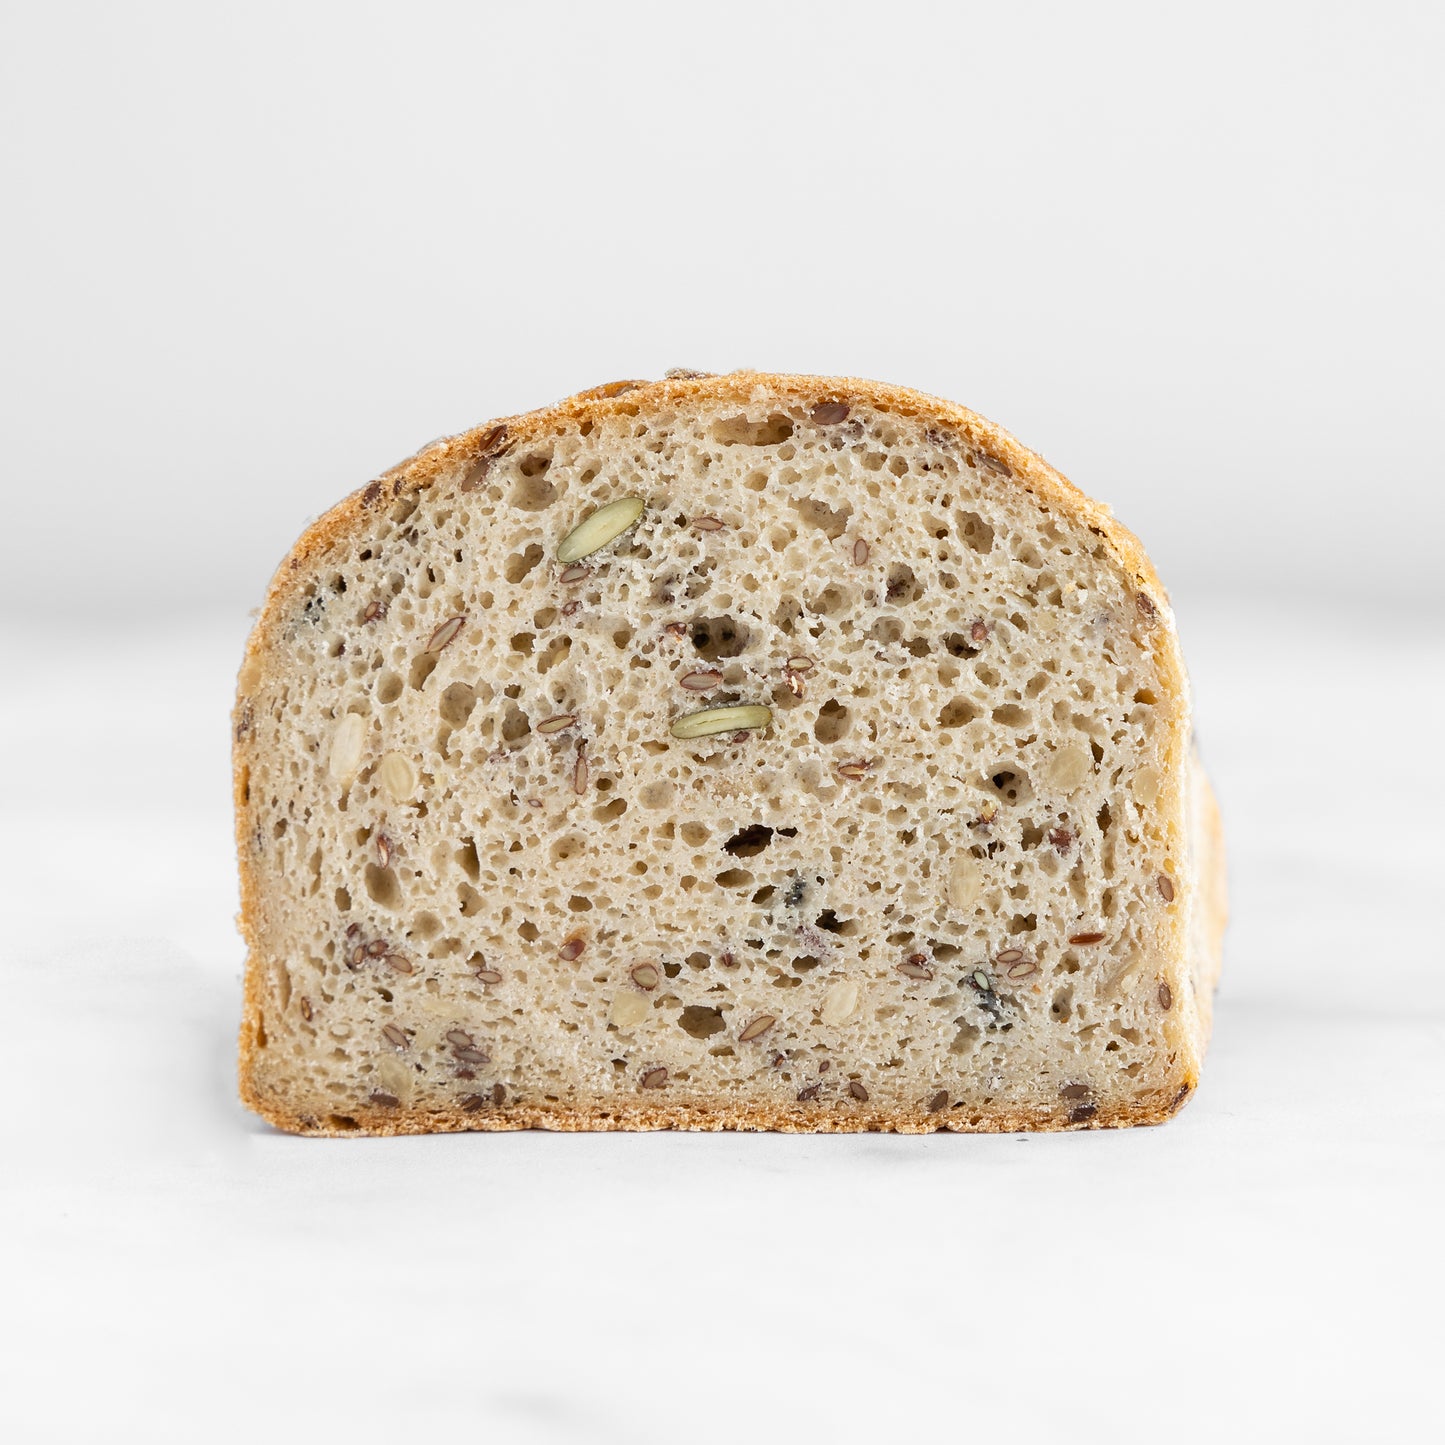 Seed yeast bread